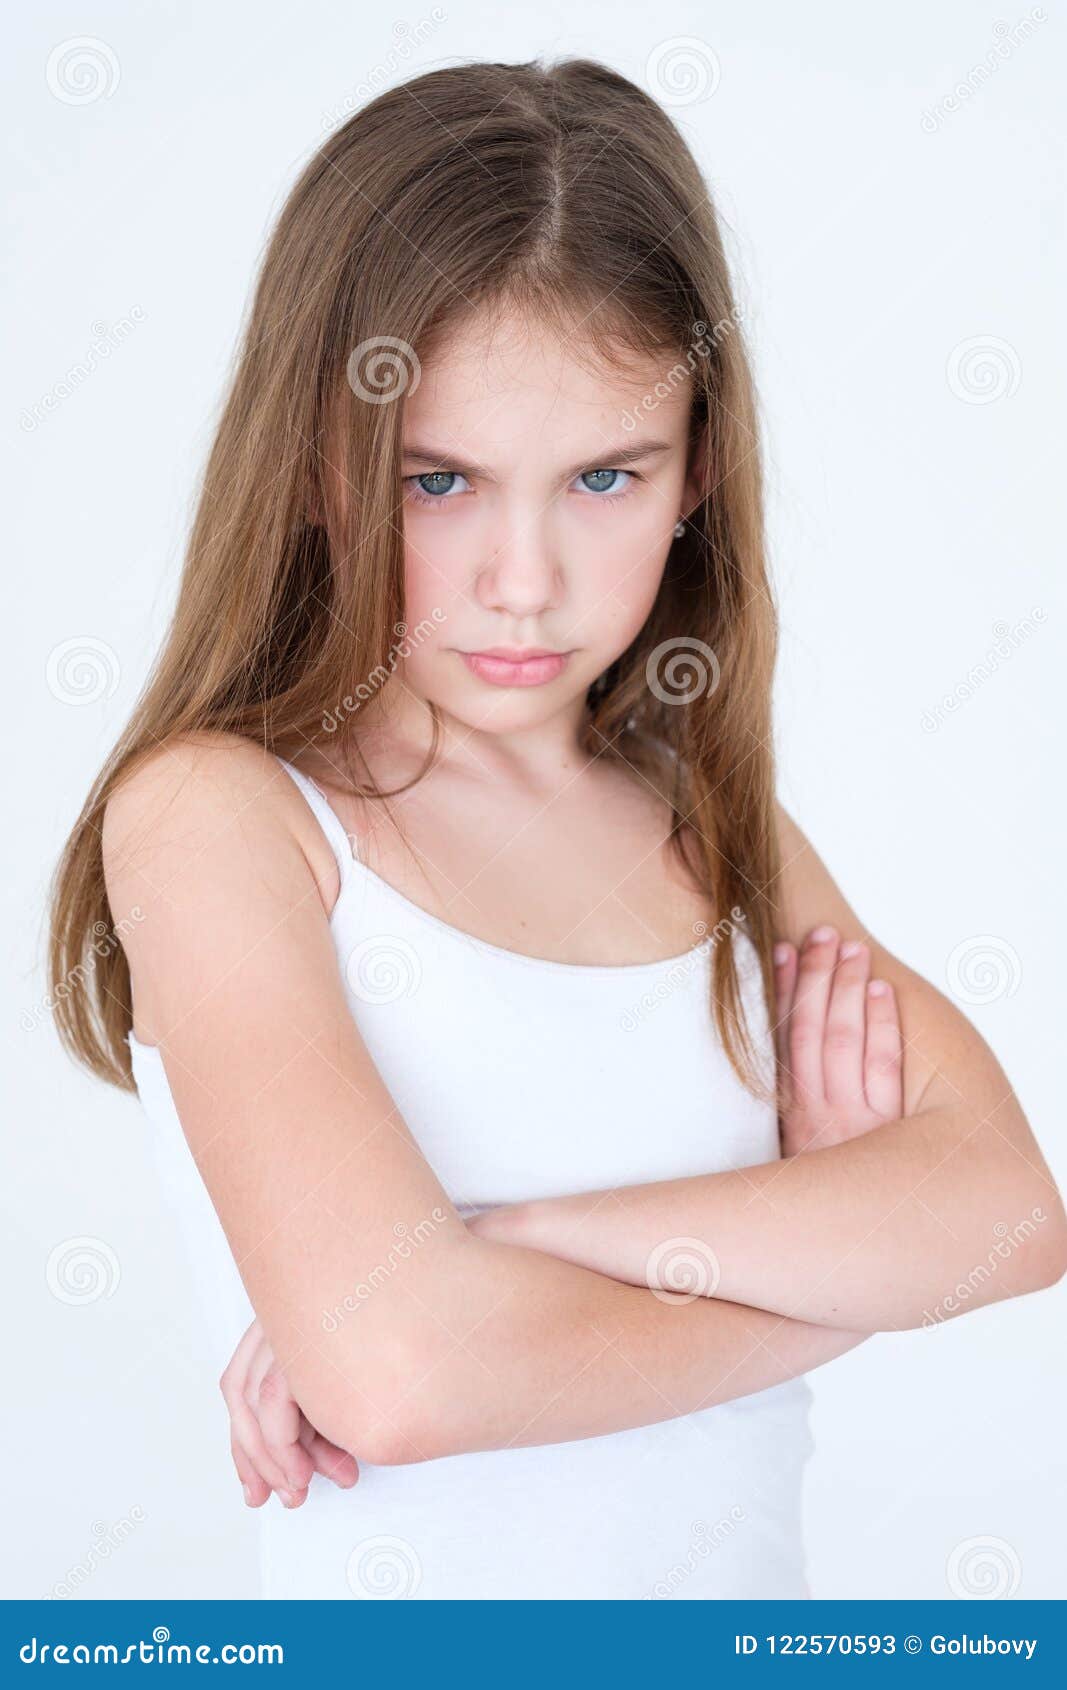 emotion sad hurt offended child girl crossed arms